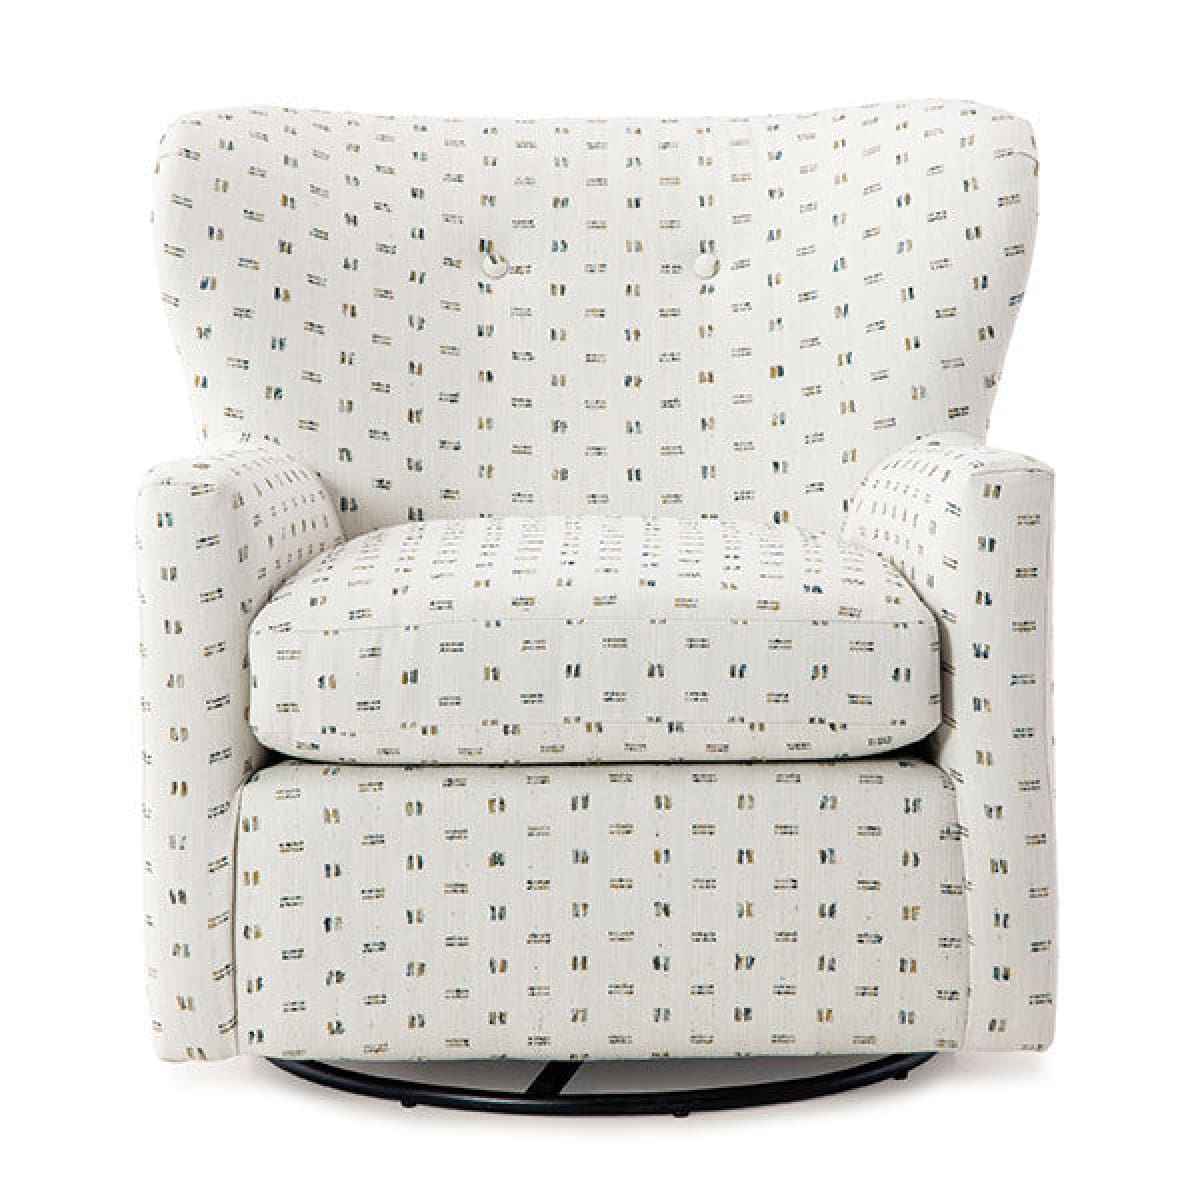 Casimere Swivel Accent Chair - accent-chairs